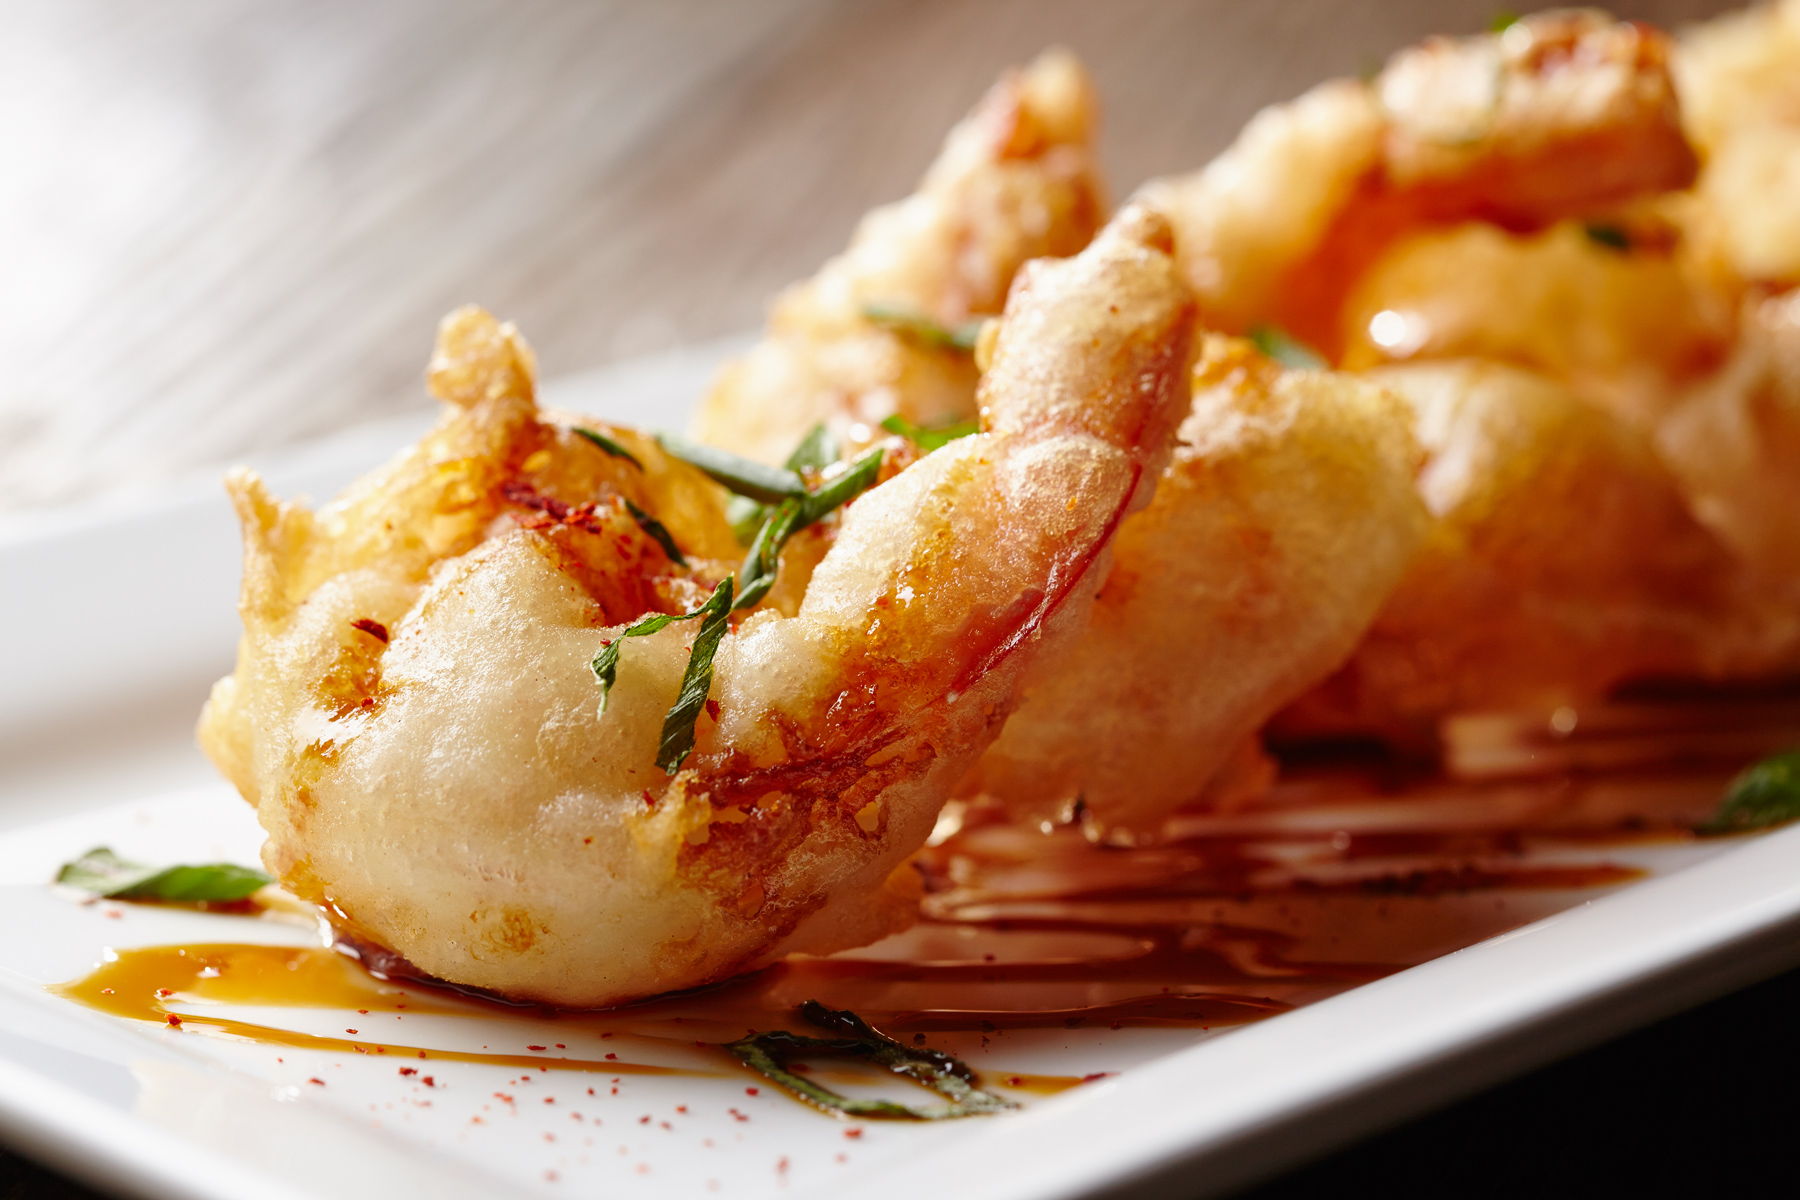 Tempura Shrimp photo by Chris Kessler Photography.  Chris Kessler is a freelance Photographer based in Milwaukee Wisconsin. Specializing in Food photography and portraiture.